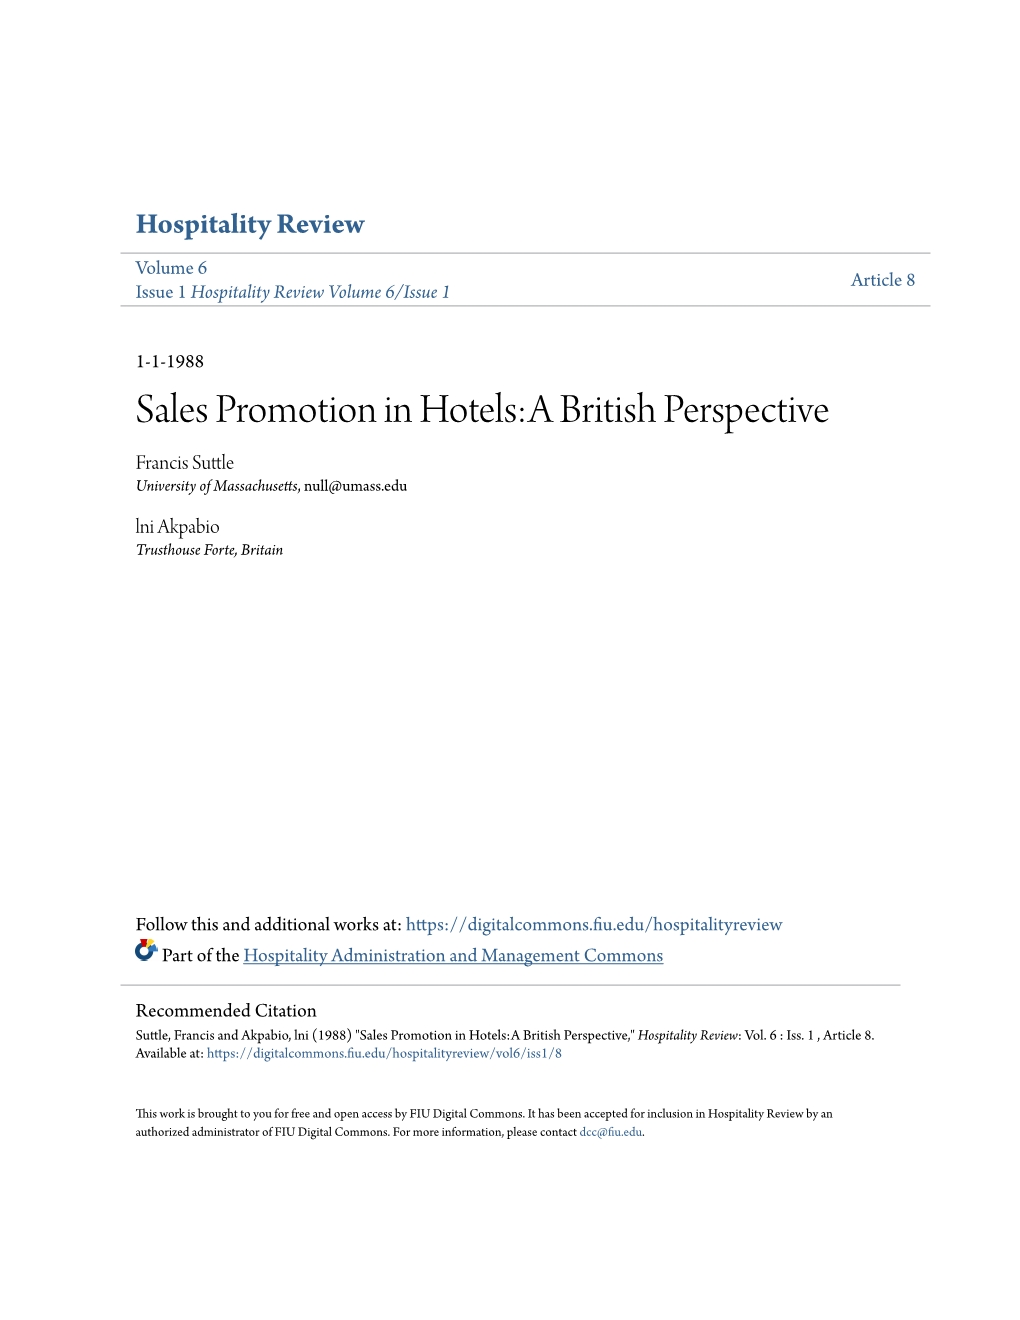 Sales Promotion in Hotels:A British Perspective Francis Suttle University of Massachusetts, Null@Umass.Edu Lni Akpabio Trusthouse Forte, Britain